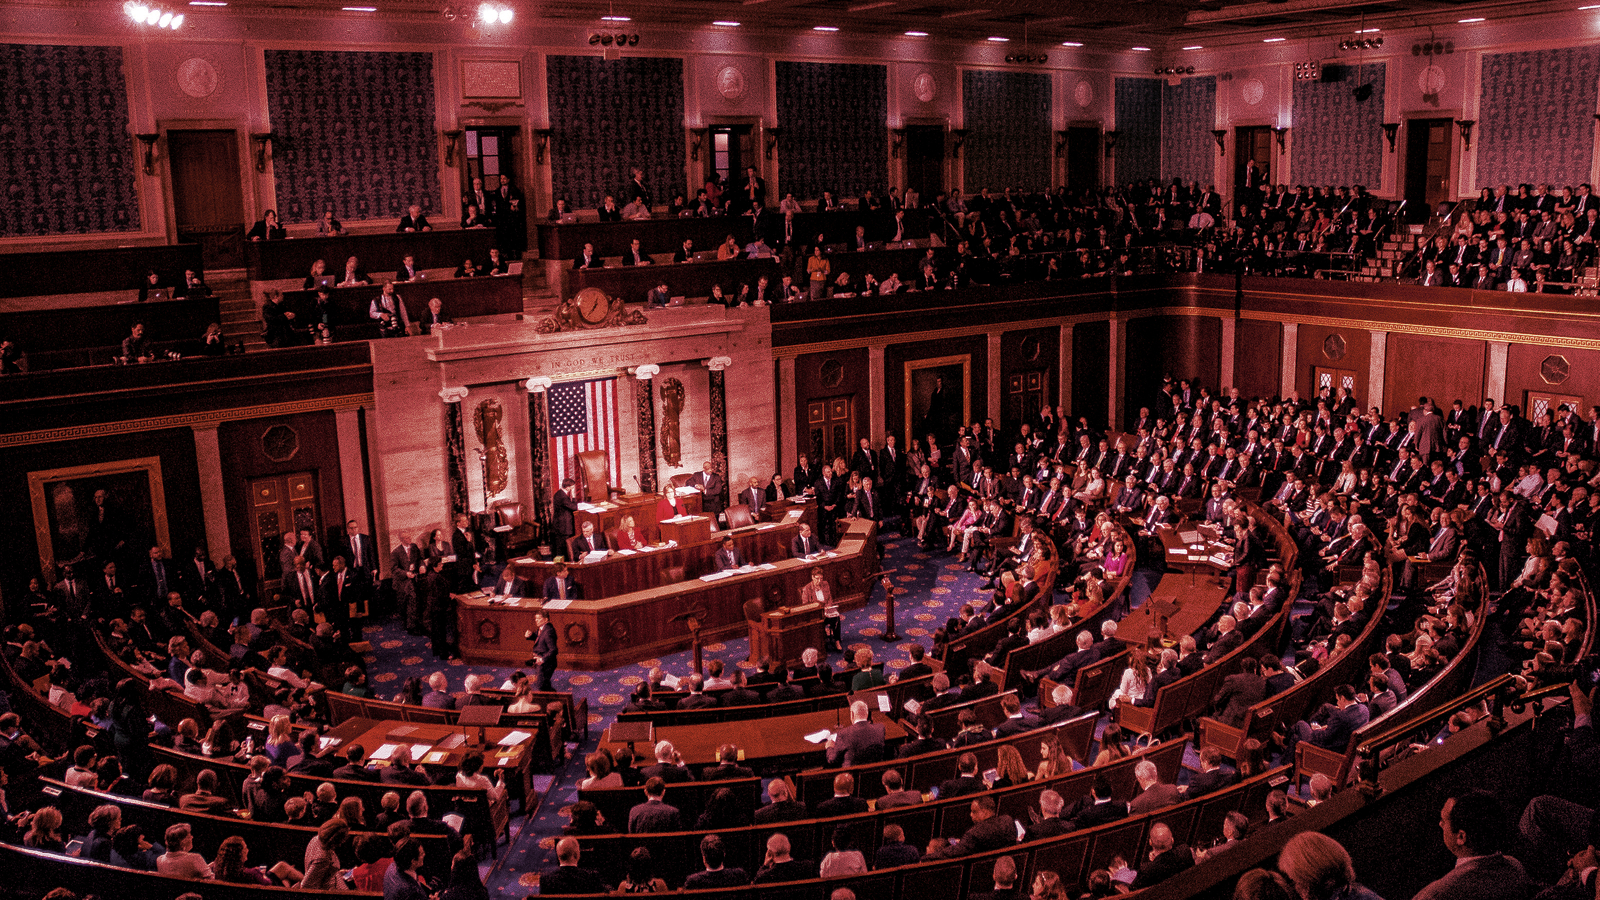 The U.S. Senate is the upper chamber of the American congress. Image: Shutterstock